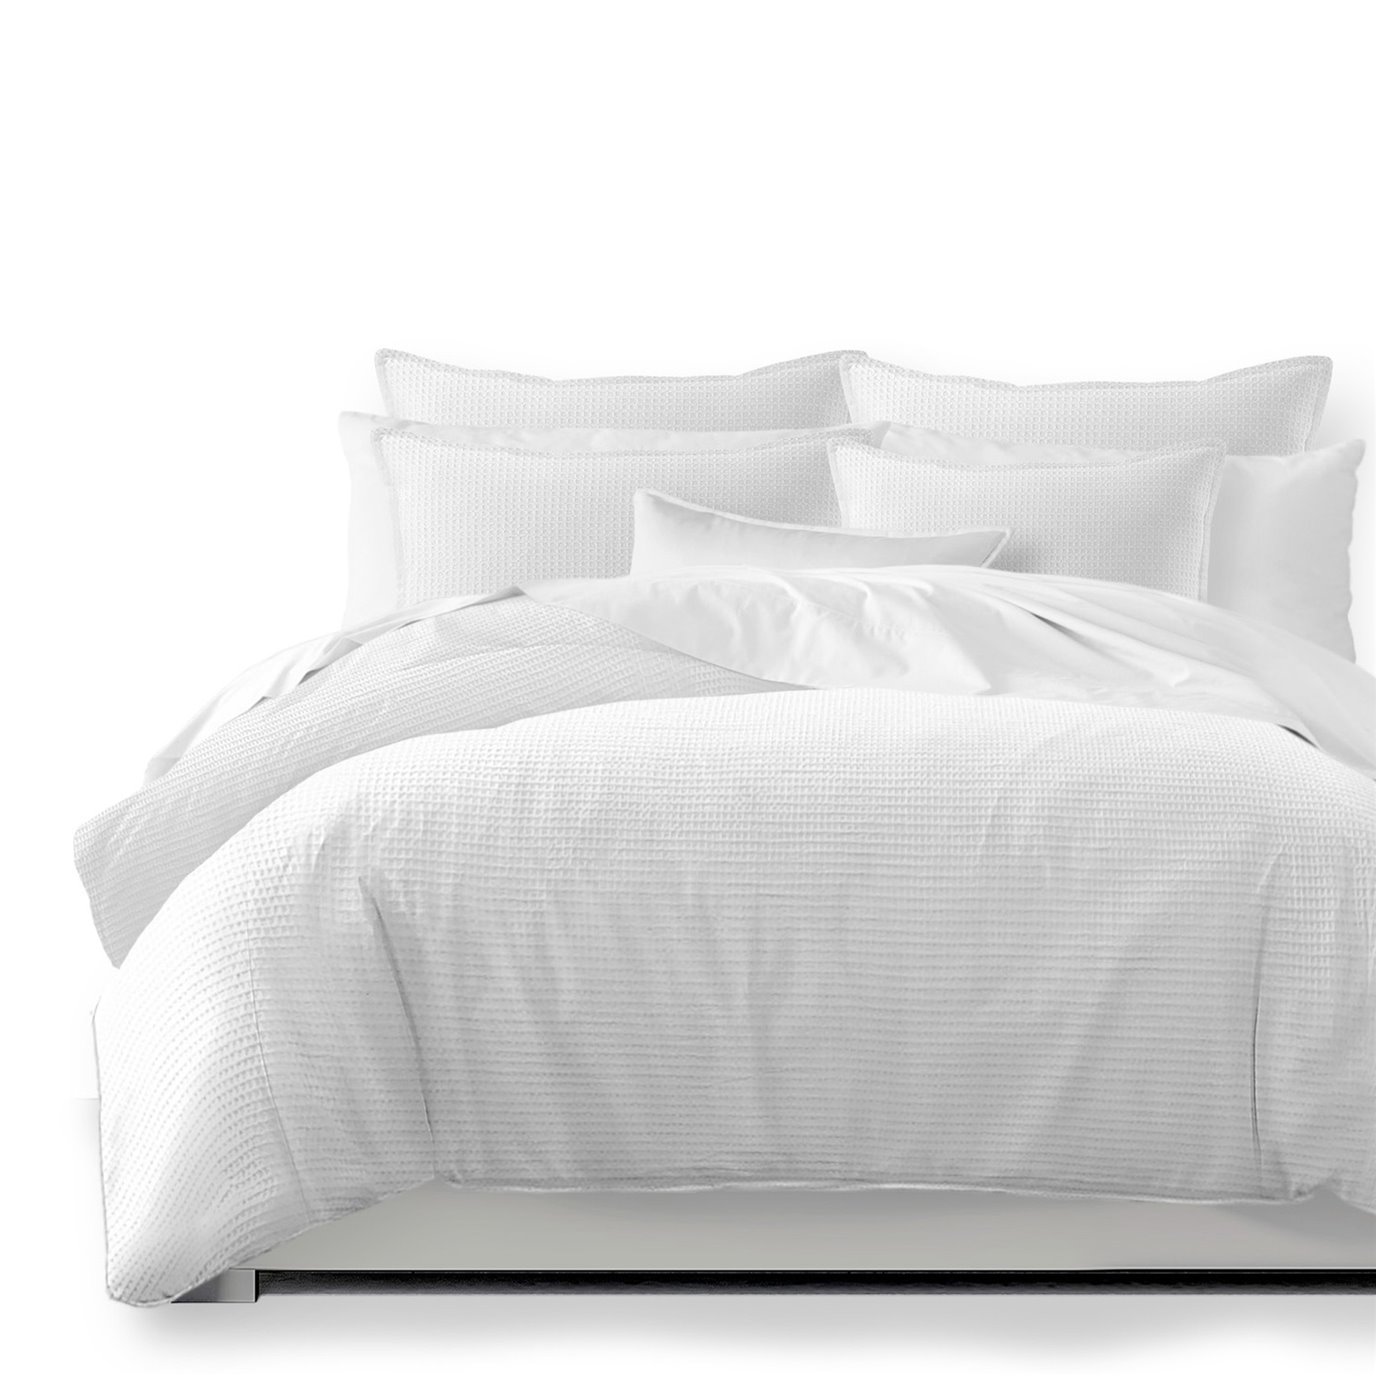 Classic Waffle White Coverlet and Pillow Sham(s) Set - Size Super Queen